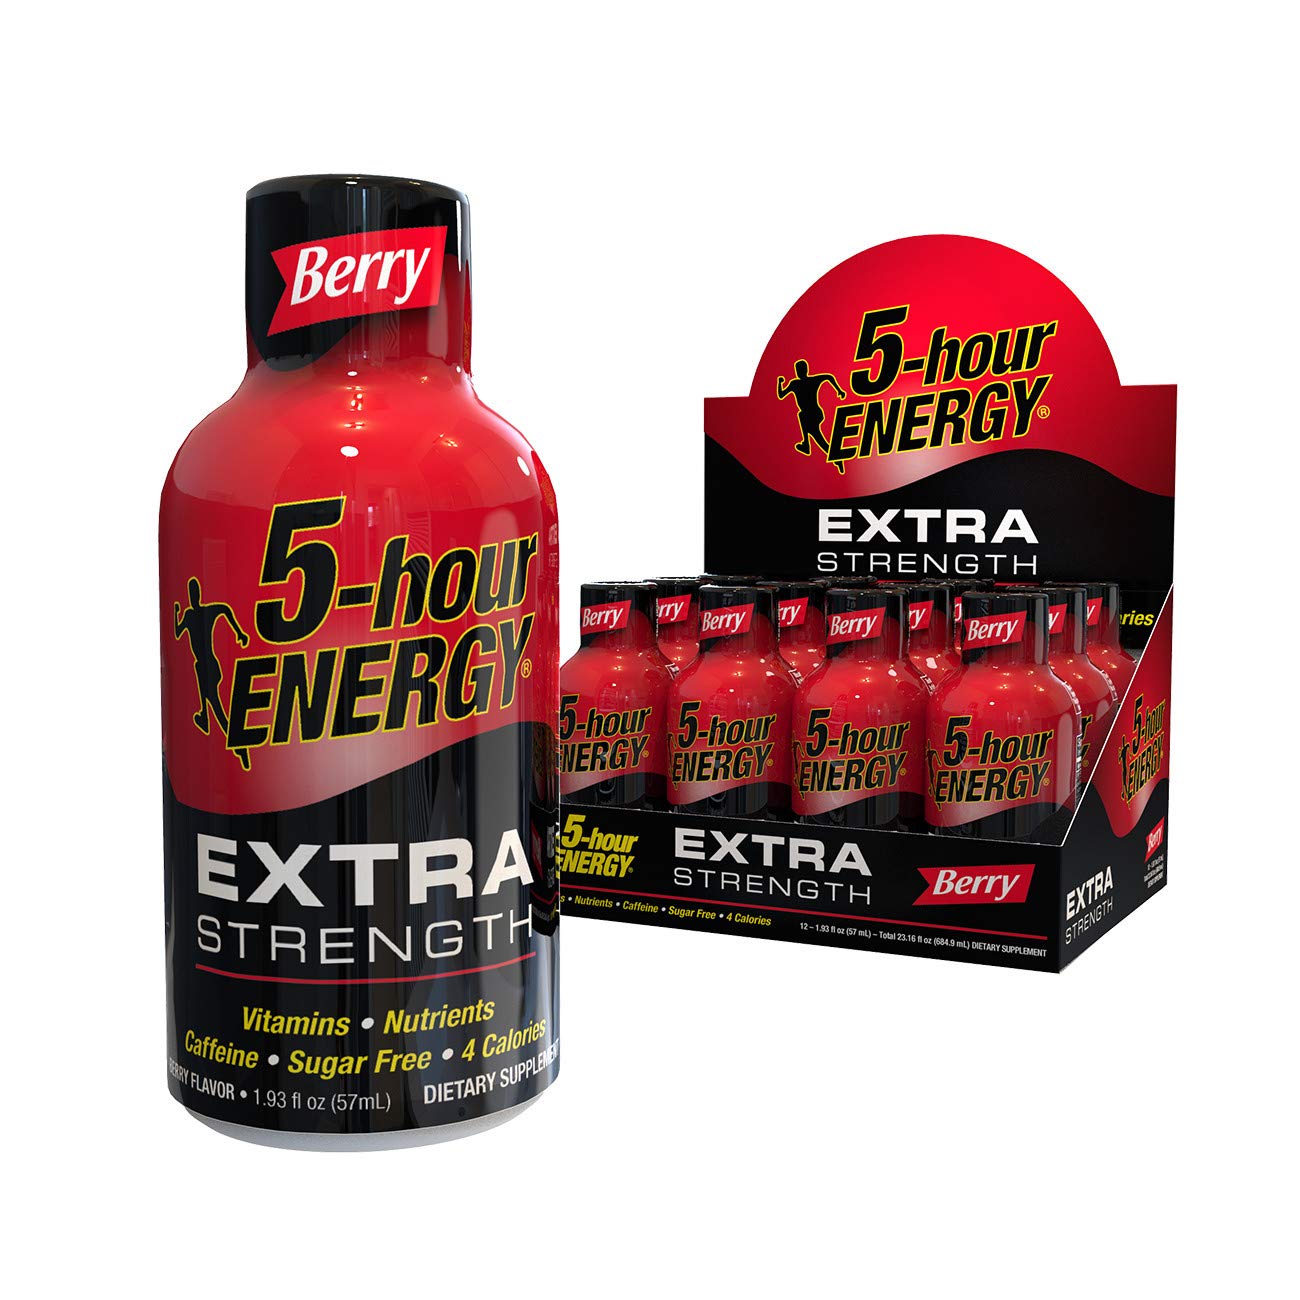 5 Hour Energy EXTRA STRENGTH Berry Discount Pack 24 Bottles